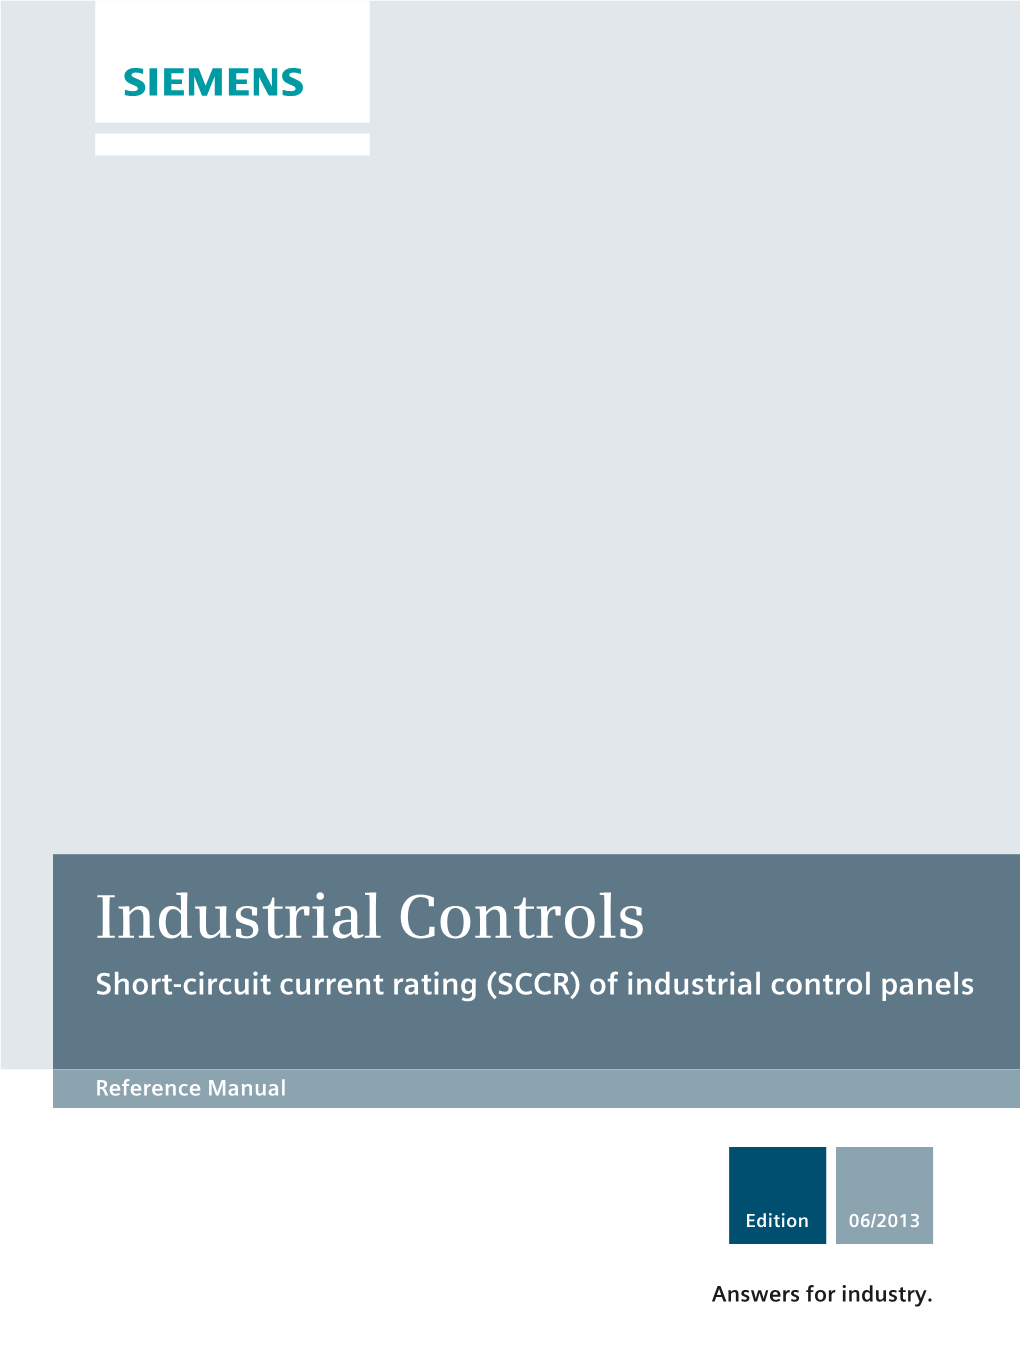 Industrial Controls Short-Circuit Current Rating (SCCR) of Industrial Control Panels